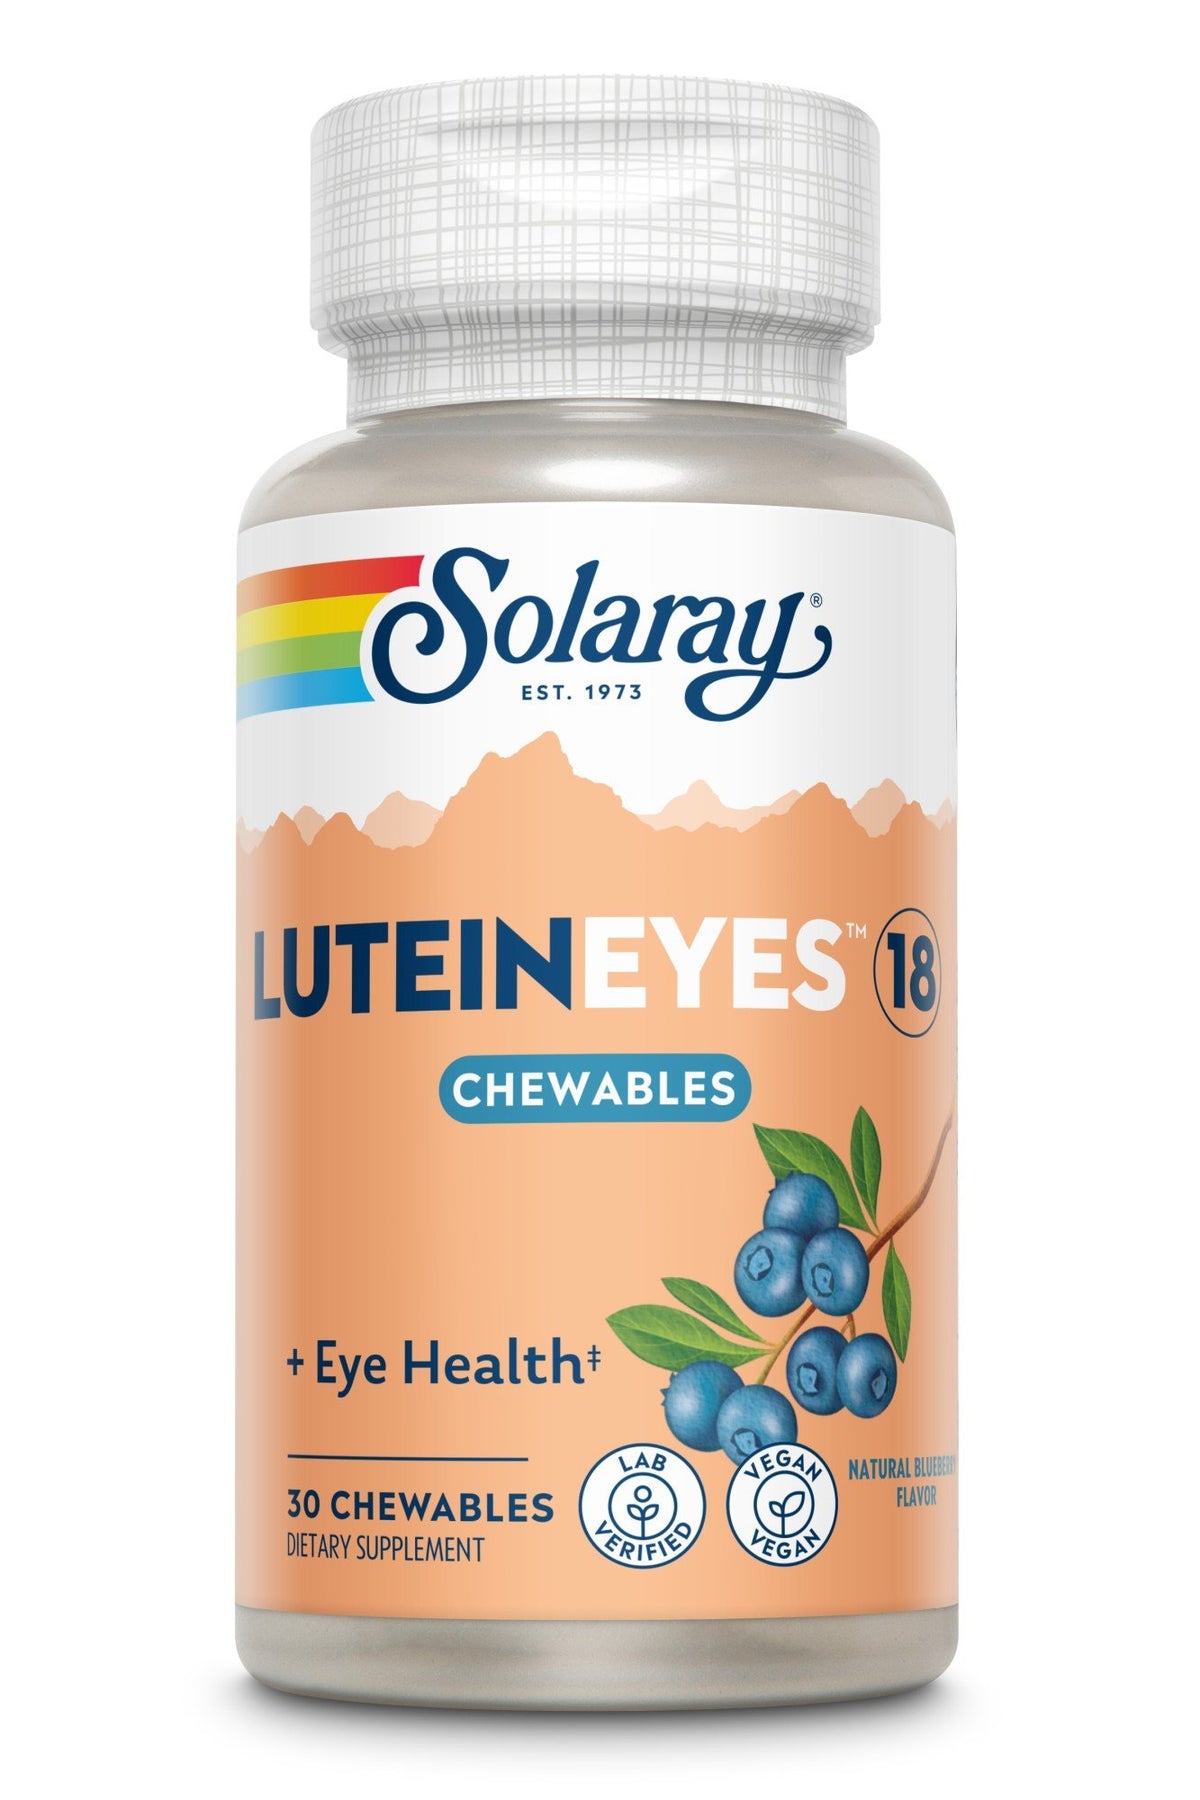 Solaray Lutein Eyes Blueberry 30 Chewable